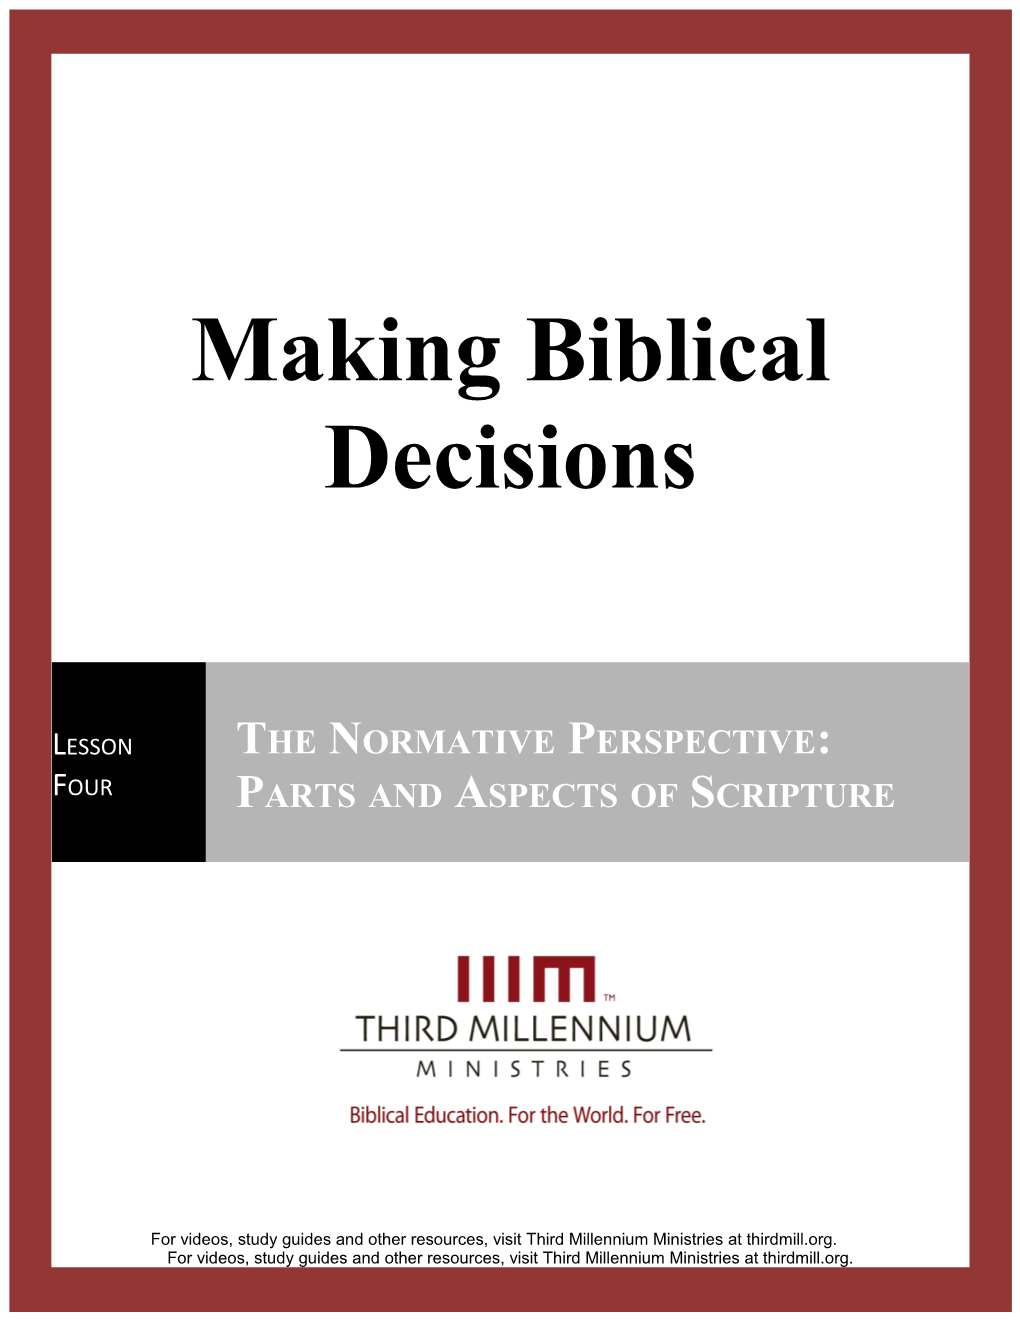 Making Biblical Decisions, Lesson 4